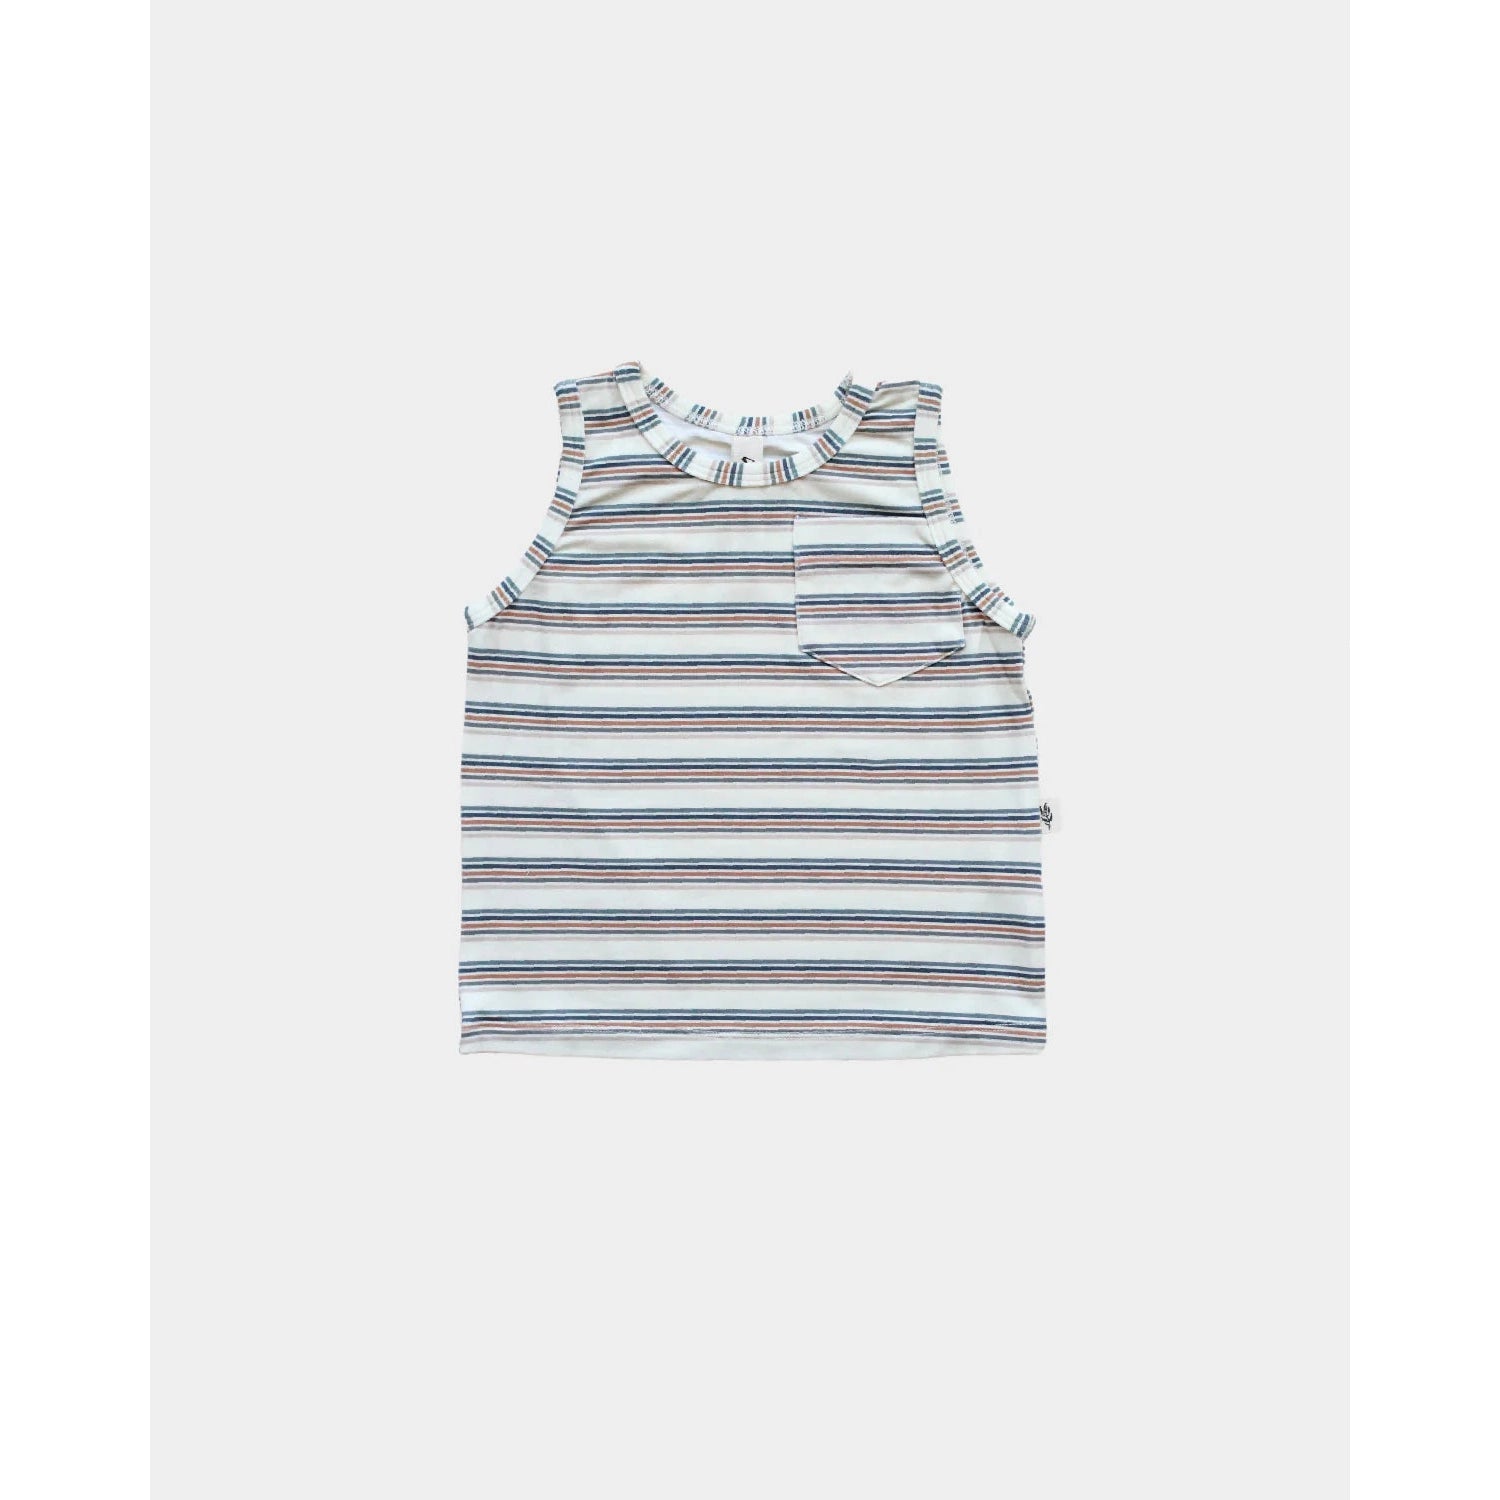 Baby Sprouts Vintage Stripe Boy's Pocket Tank-Baby Sprouts-Little Giant Kidz